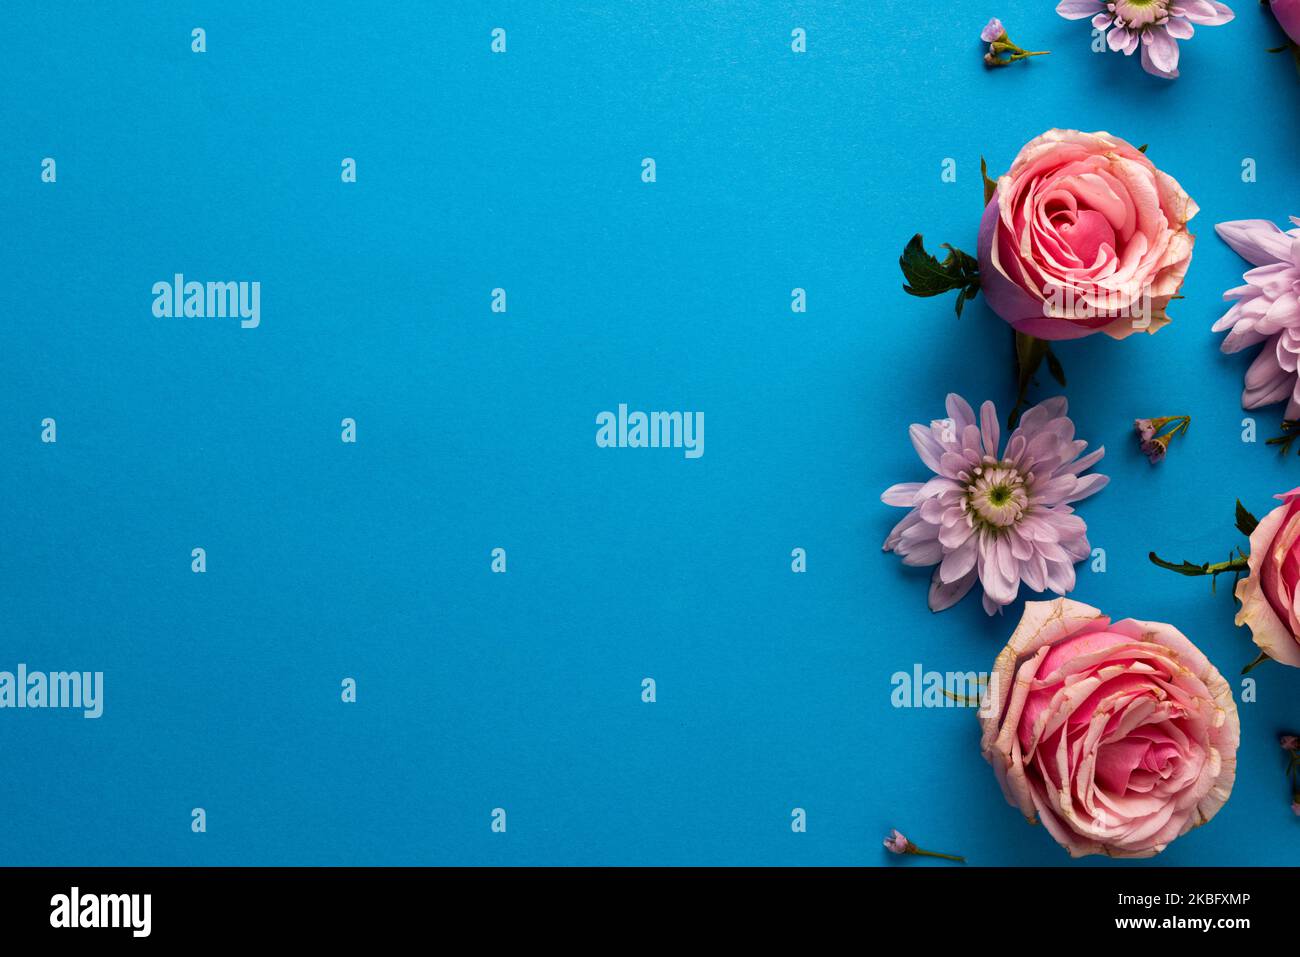 Composition of roses on blue background Stock Photo